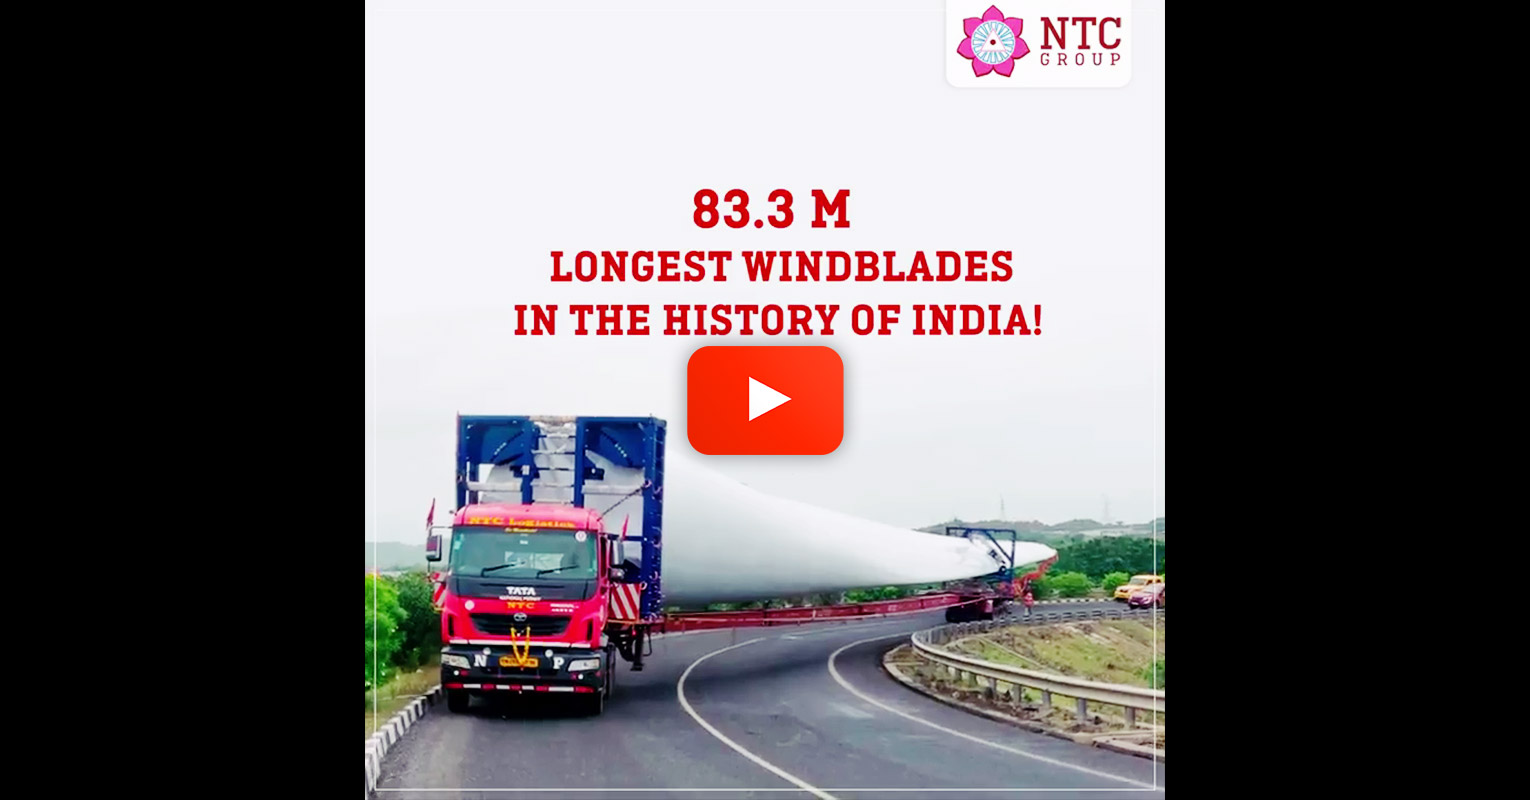 NTC Delivers the HULKS of Wind Industry